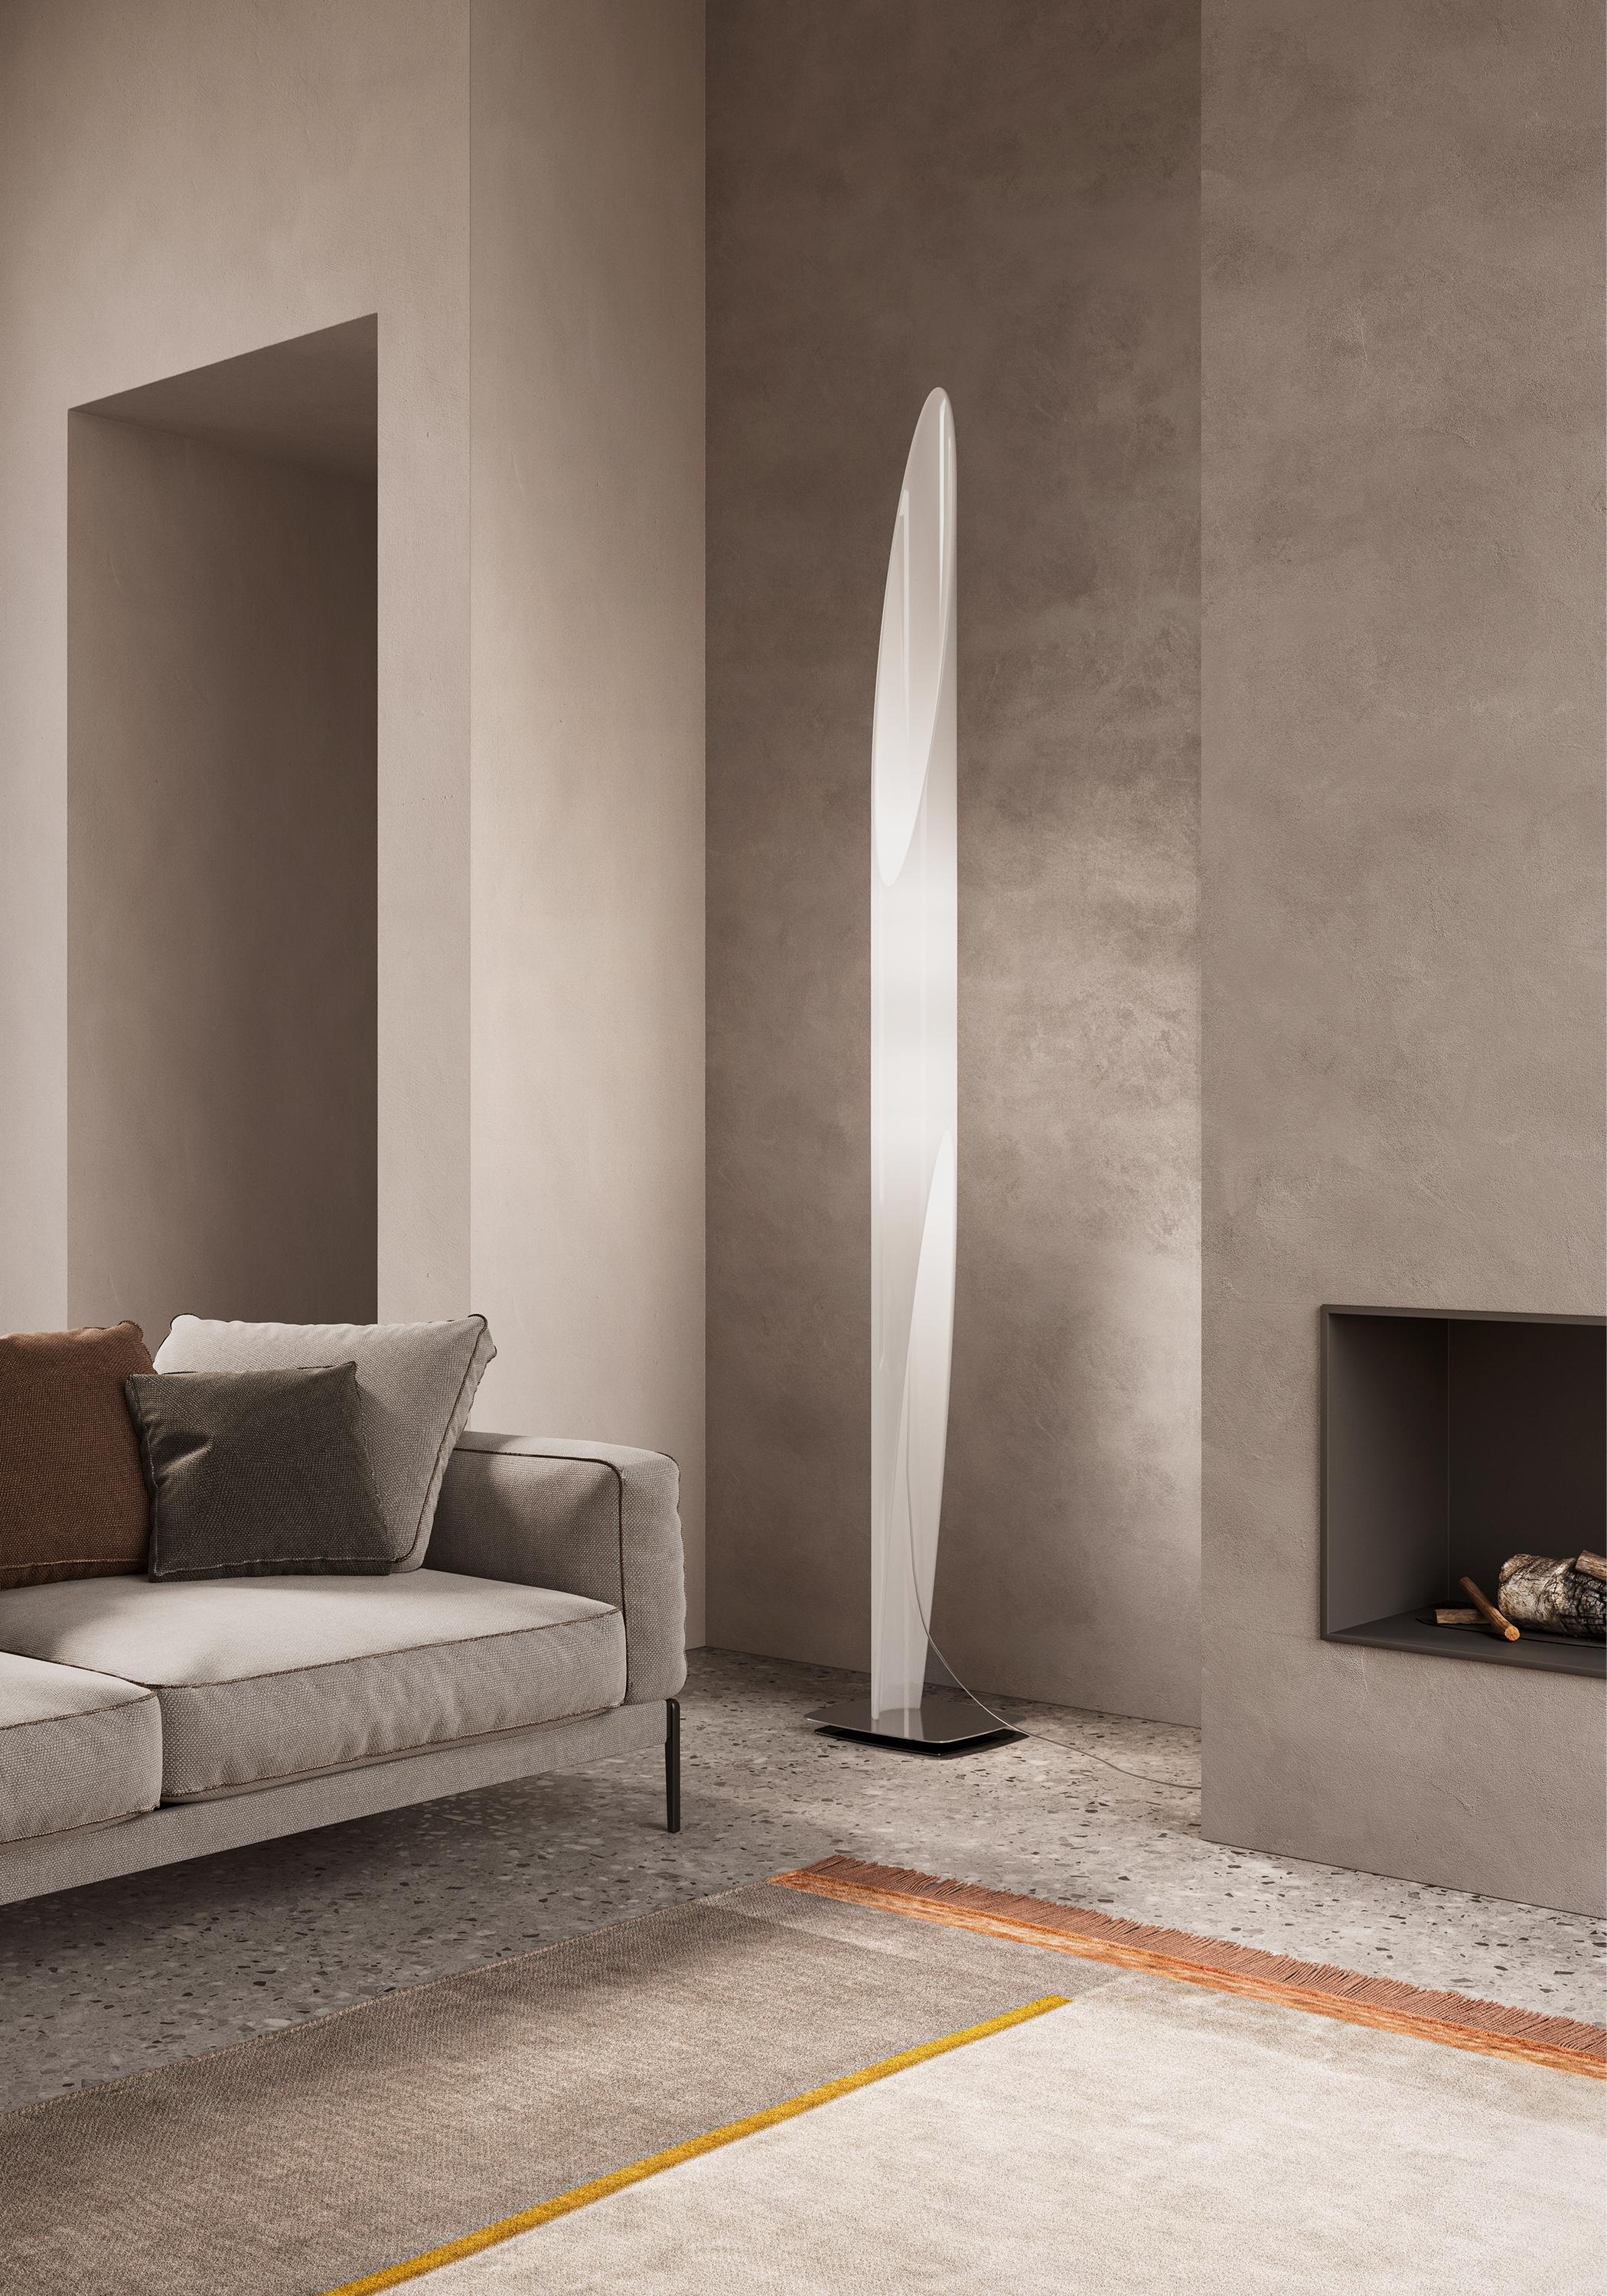 Shakti 250

Industrial language finds an unusual expression and plays on simple, clean lines. The tubular diffuser, sliced diagonally at both ends, acquires a new impetus. Formal purity for a floor lamp that is always up-to-date. Floor lamp with